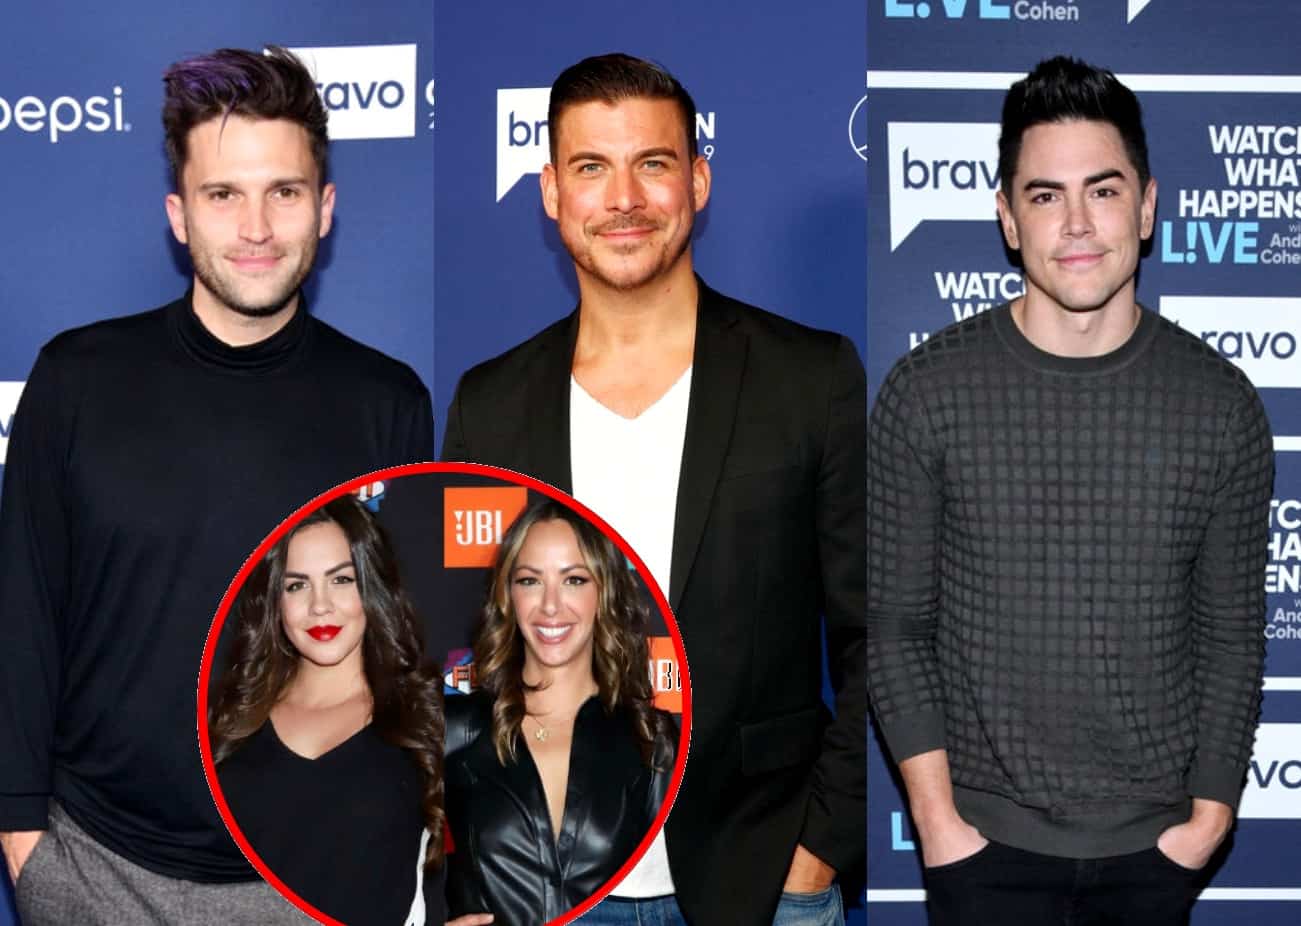 Vanderpump Rules' Tom Schwartz Reveals Why He's No Longer on Jax Taylor's Side Amid His Feud With Tom Sandoval, Offers an Update on Katie Maloney and Kristen Doute's Feud and Teases Second Wedding